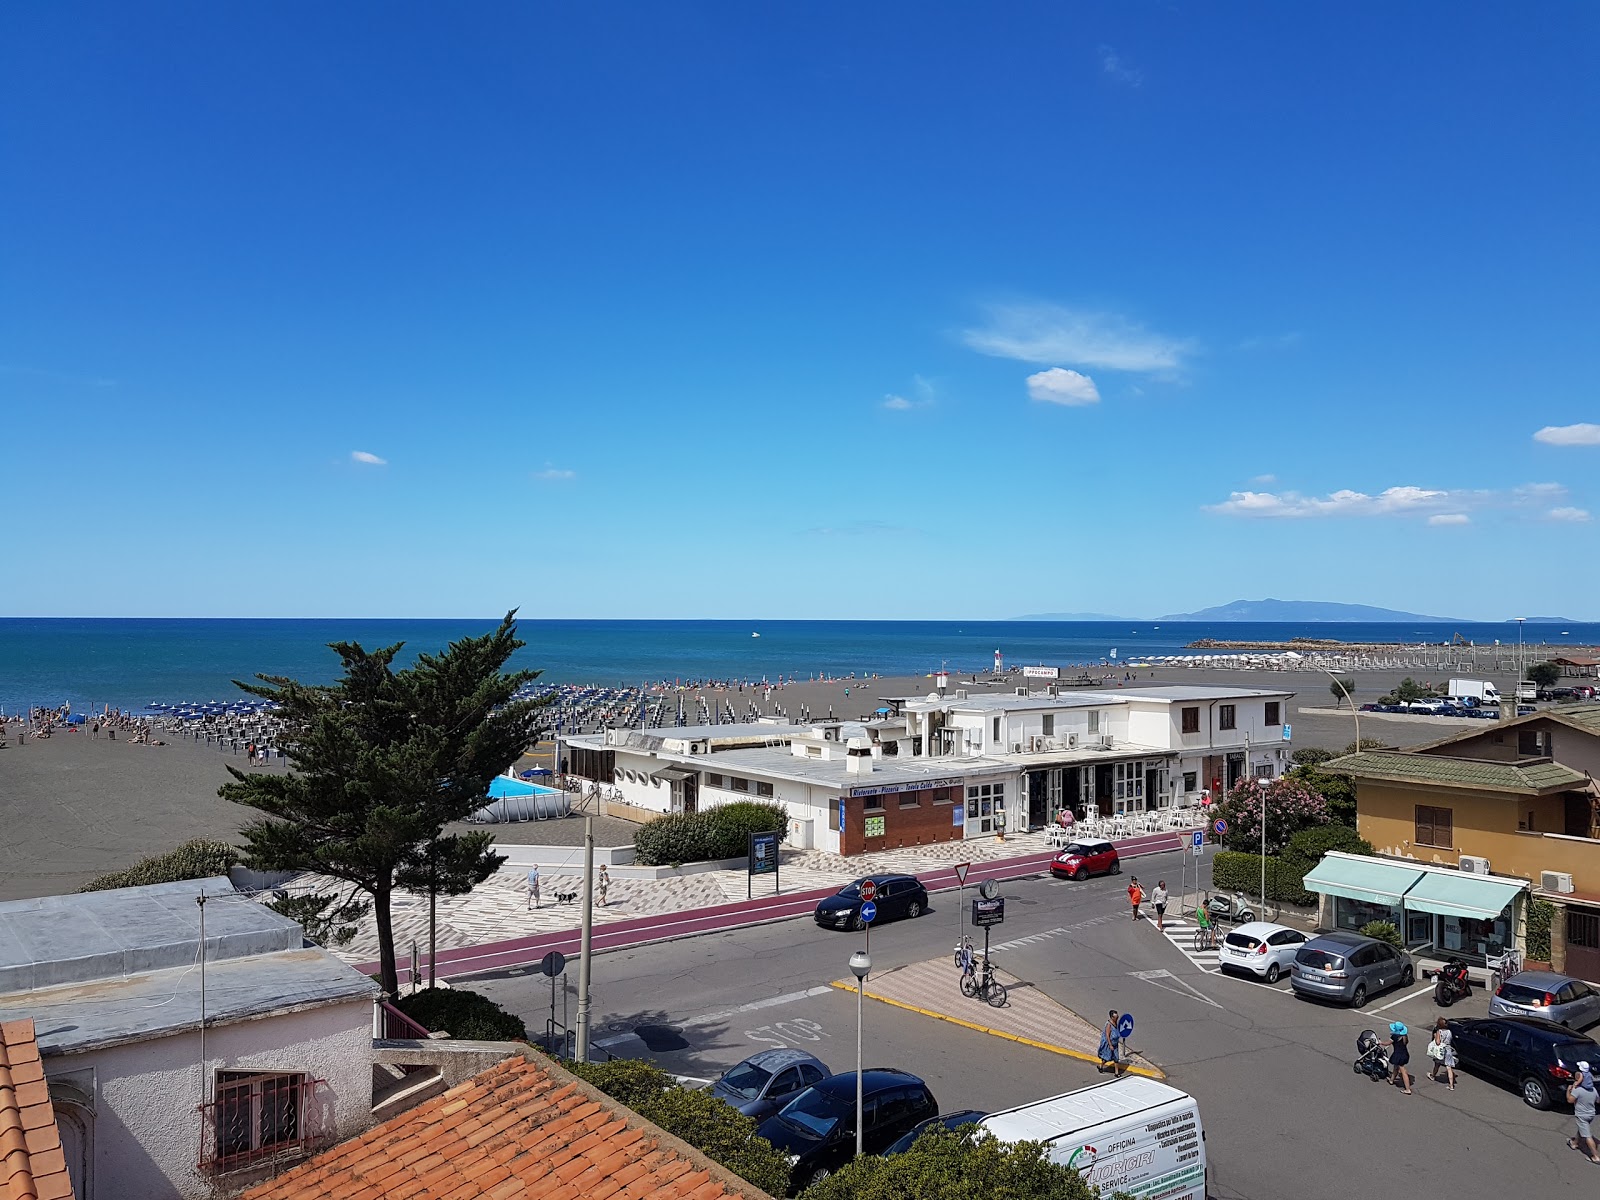 Photo of Montalto Marina beach with blue water surface